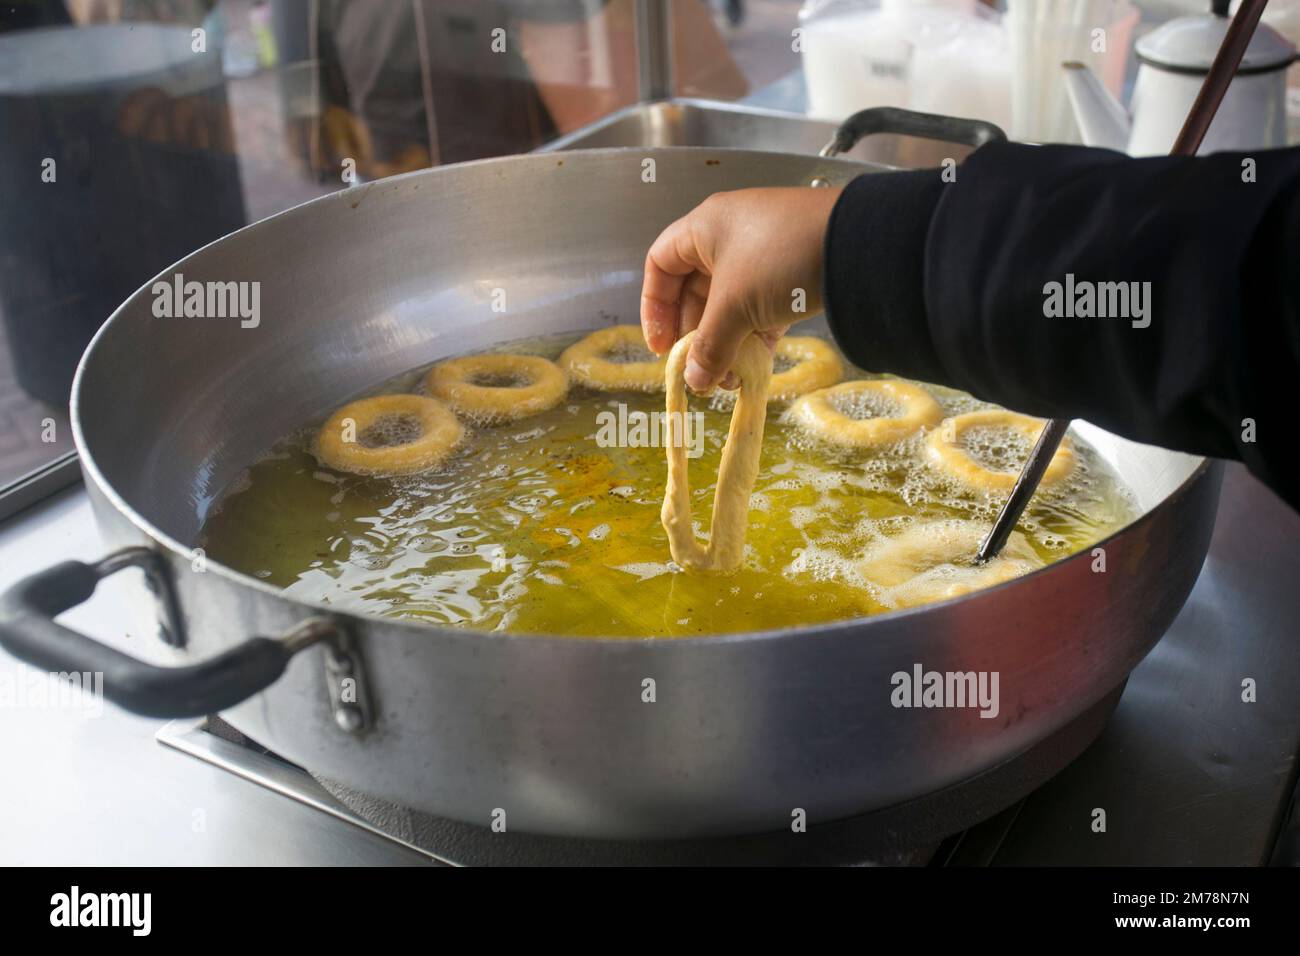 Picarones are ring-shaped fried sweets made with wheat flour dough mixed with squash, and sometimes sweet potato, bathed in flavored chancaca honey. Stock Photo